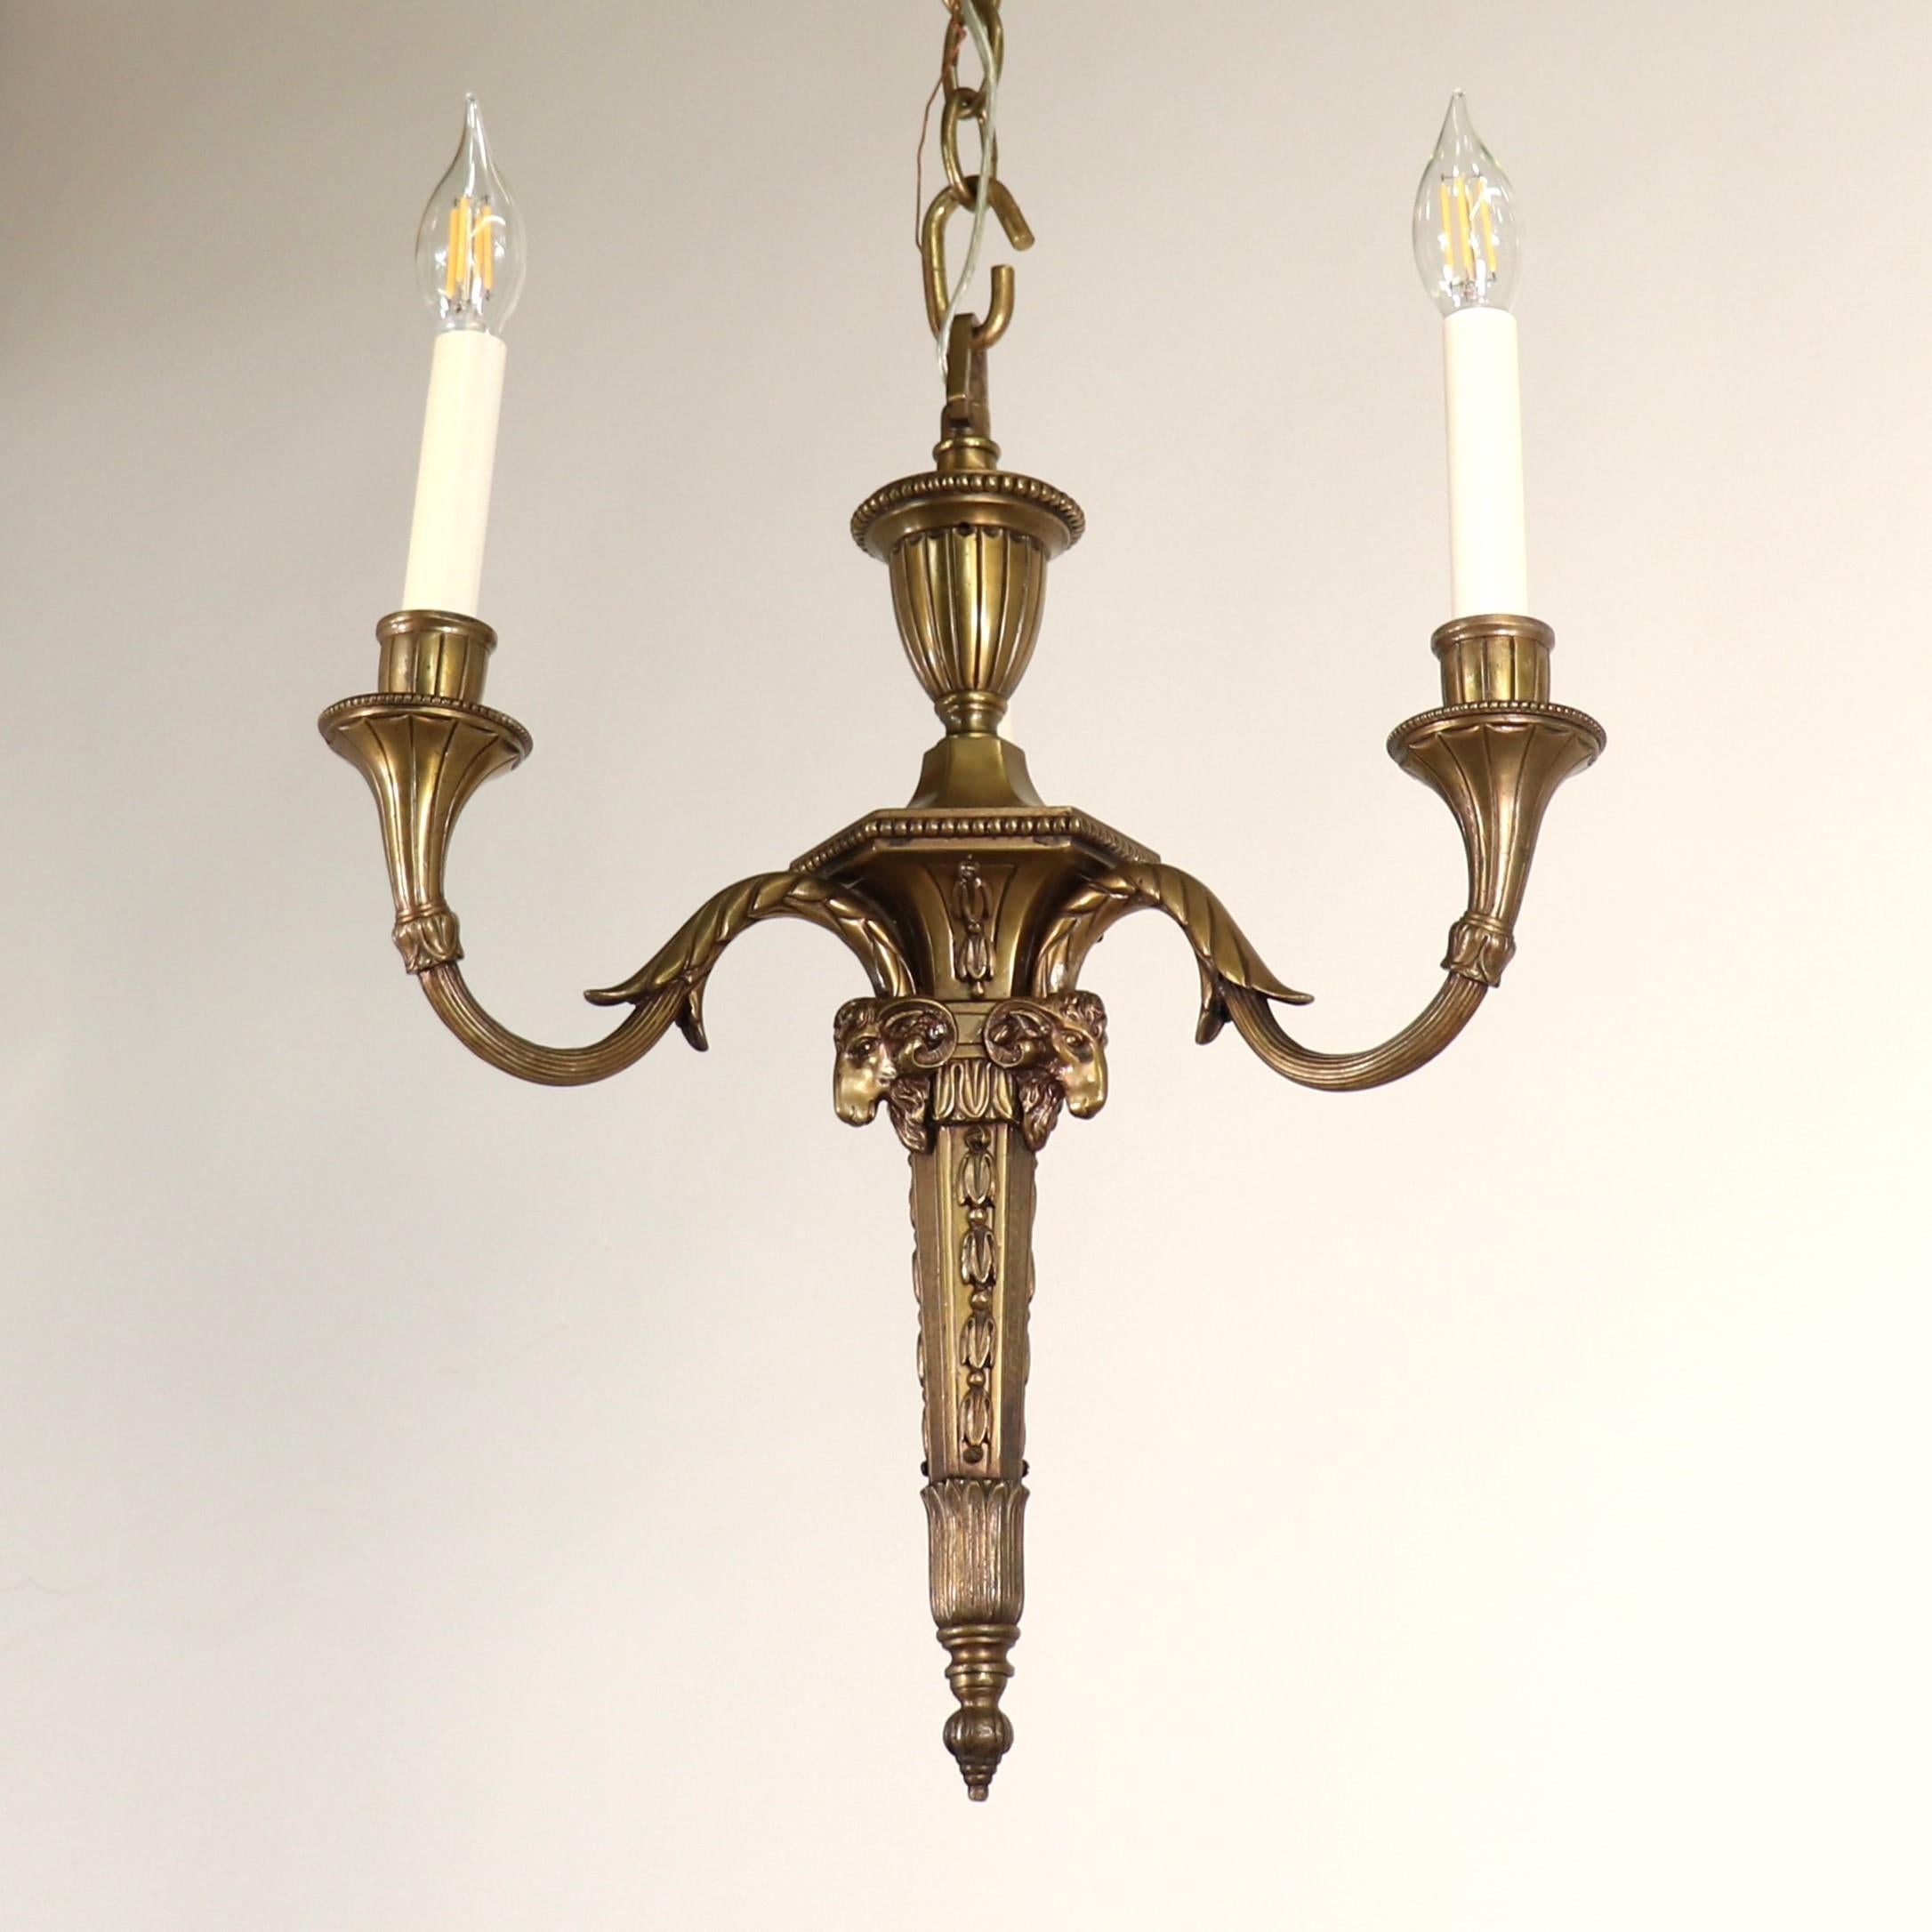 Hand-Carved 19th Century French Louis XVI Style Neoclassical Bronze Flambeau Chandelier For Sale